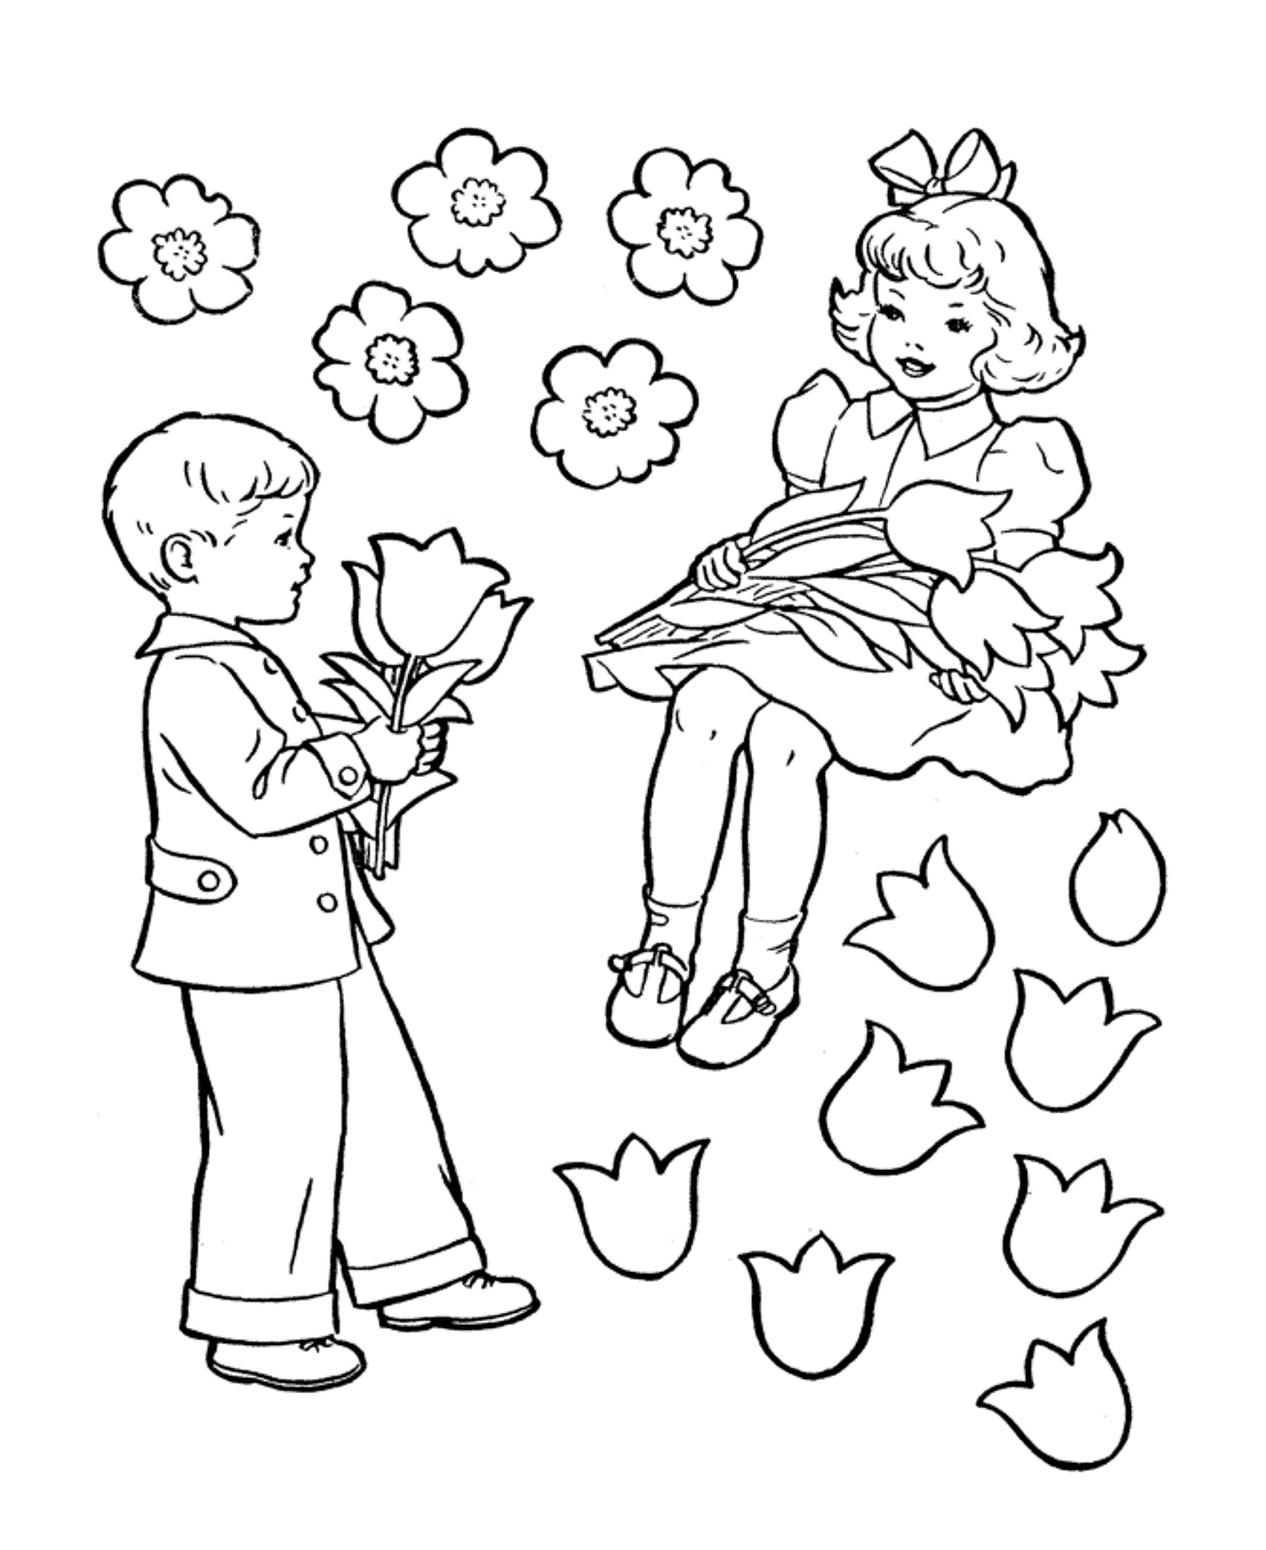 700 Top Coloring Pages Boy And Girl For Free